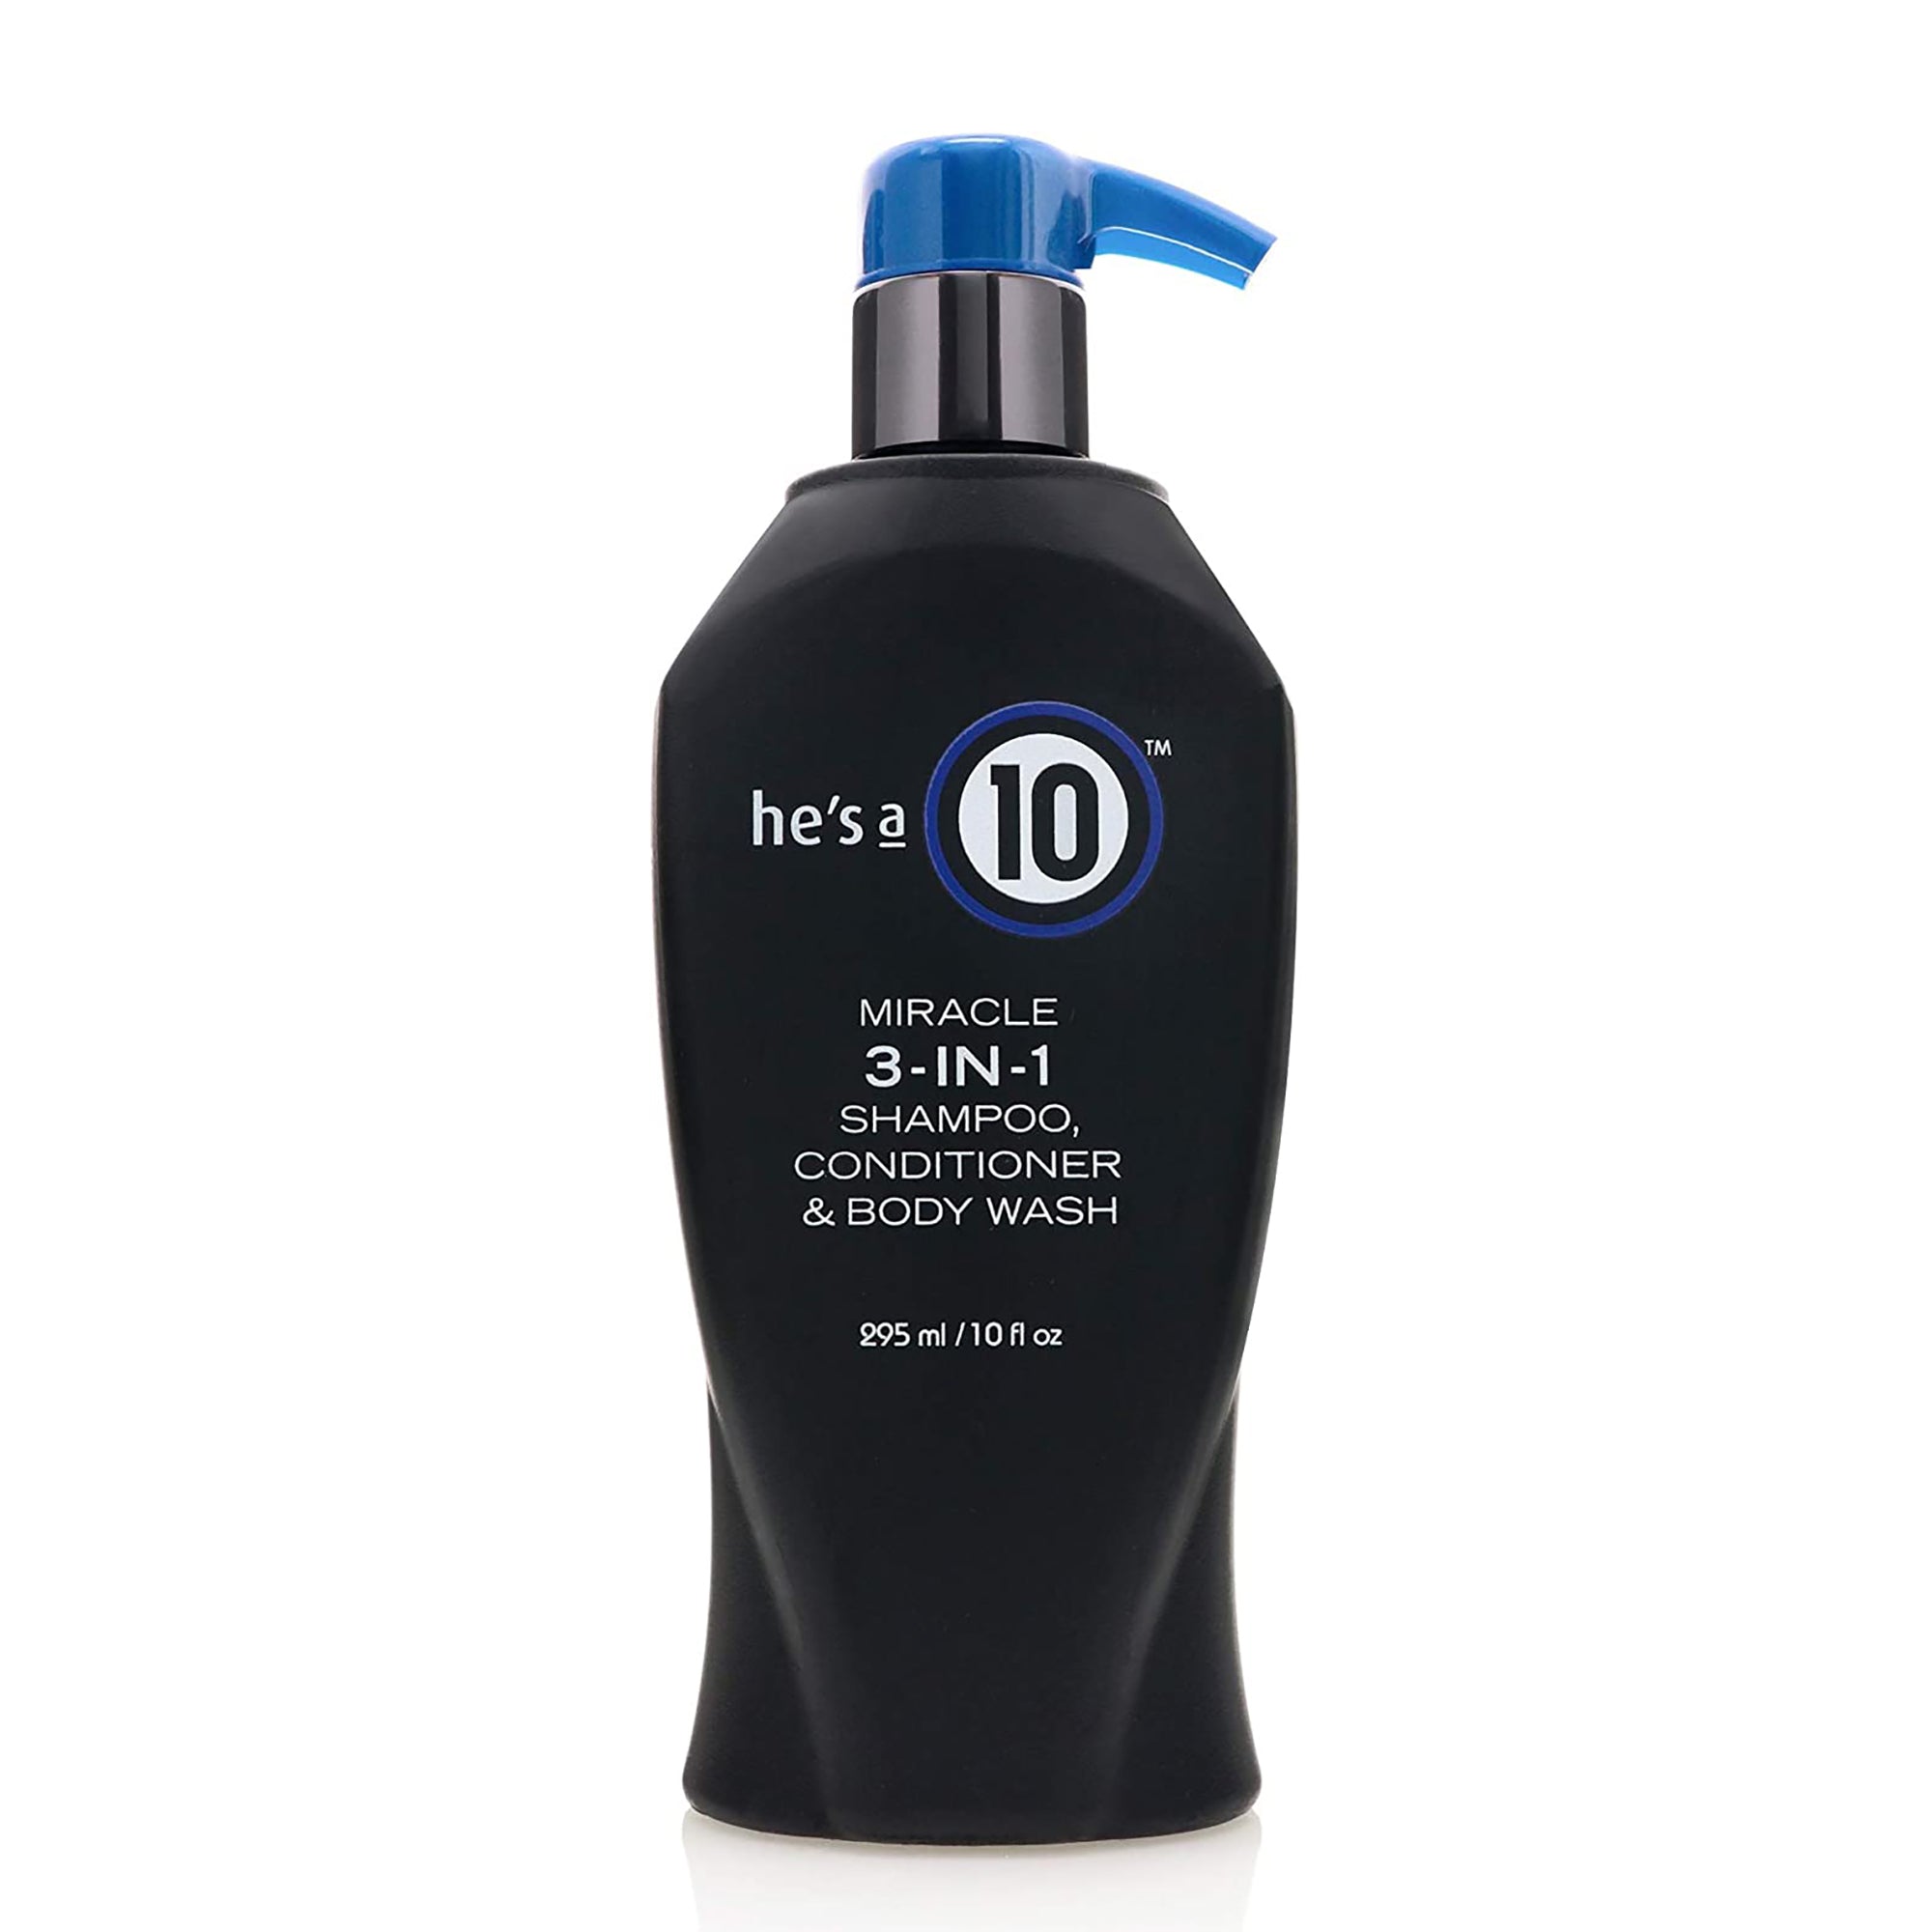 It's a 10 He's a 10 Miracle 3-IN-1 Shampoo, Conditioner & Body Wash / 10.OZ